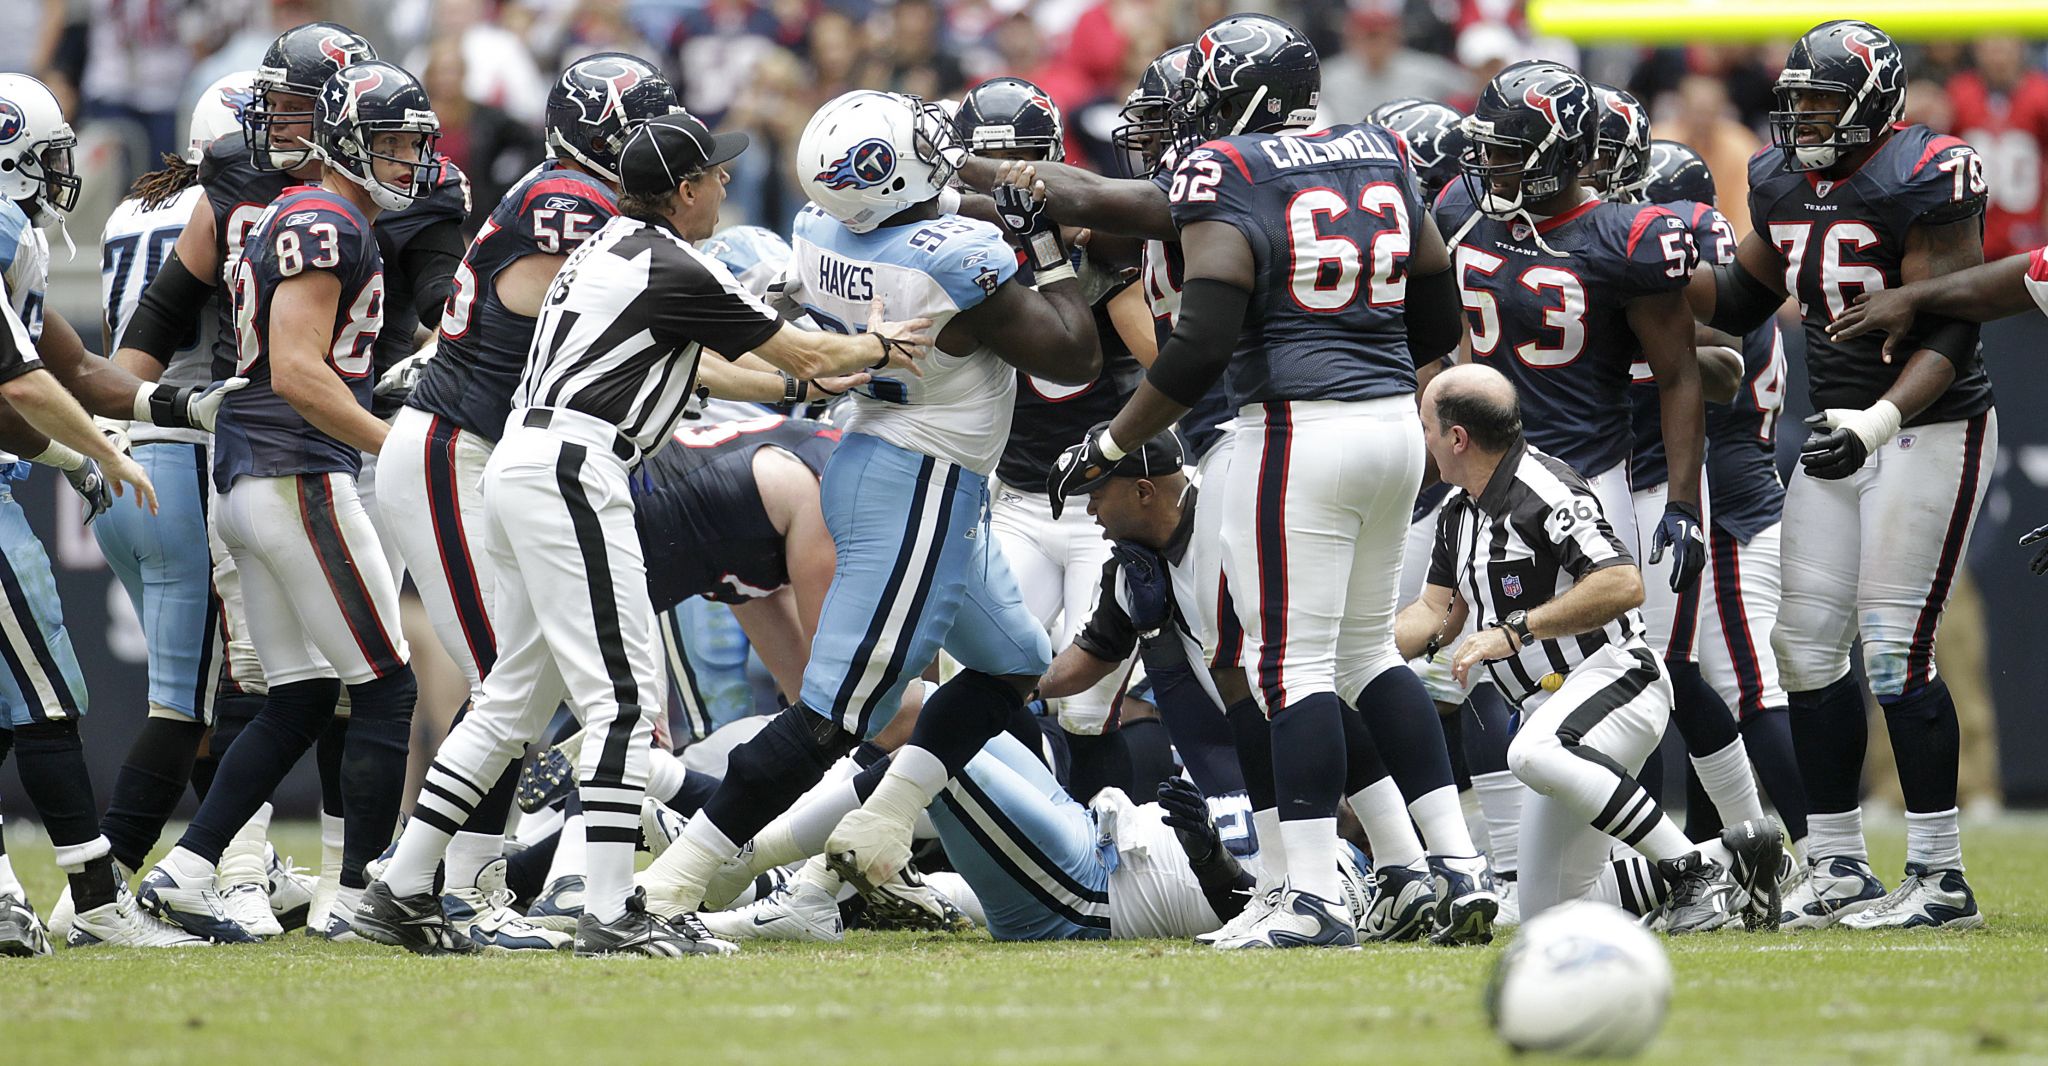 Texans vs. Titans: A complex history but not yet a real rivalry